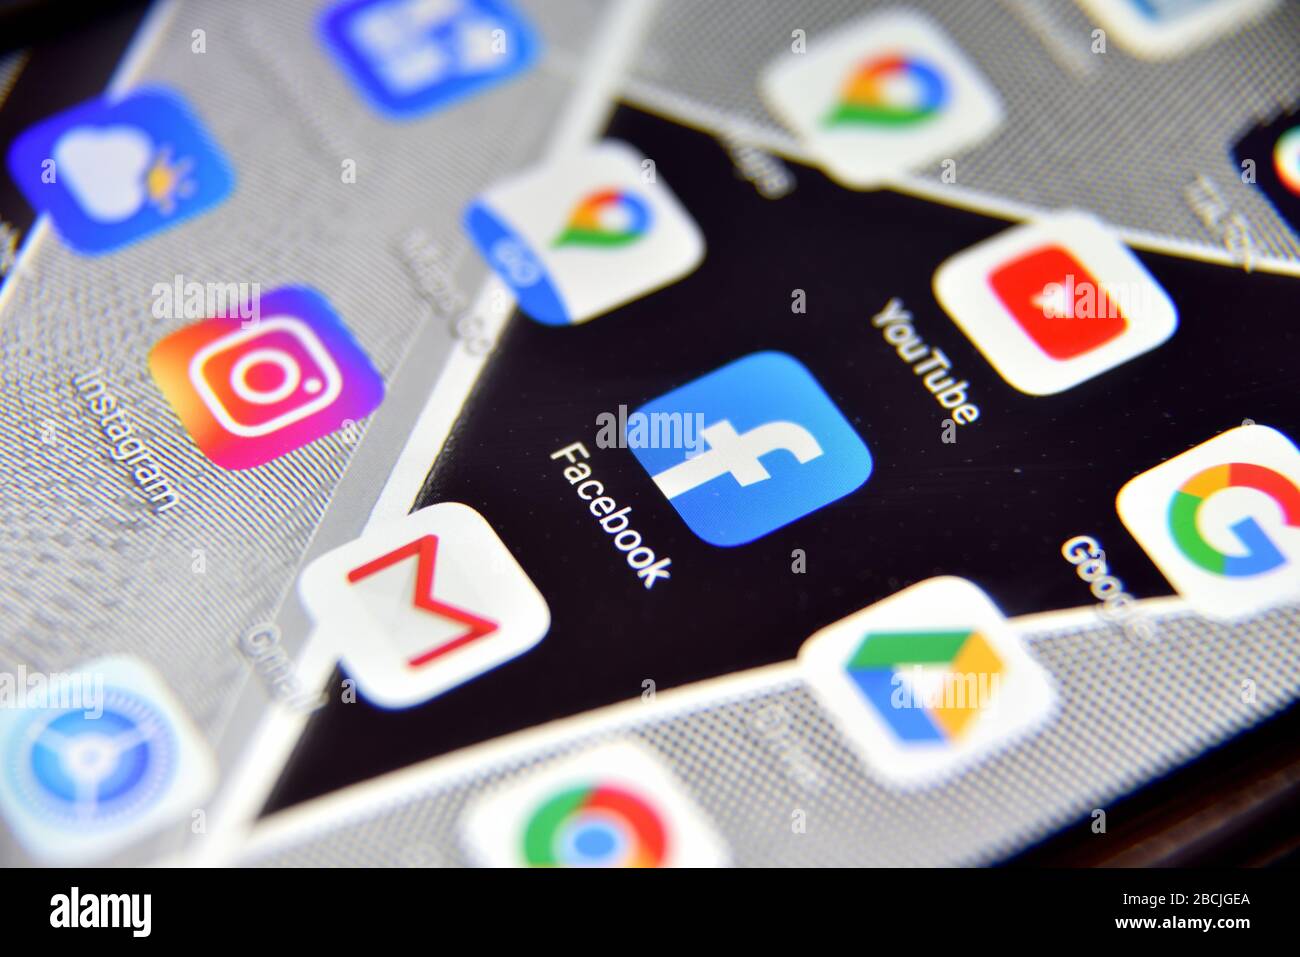 Valverde (CT), Italy - April 04, 2020: Close-up view of Facebook icon app on an Android smartphone, including other icons. Stock Photo